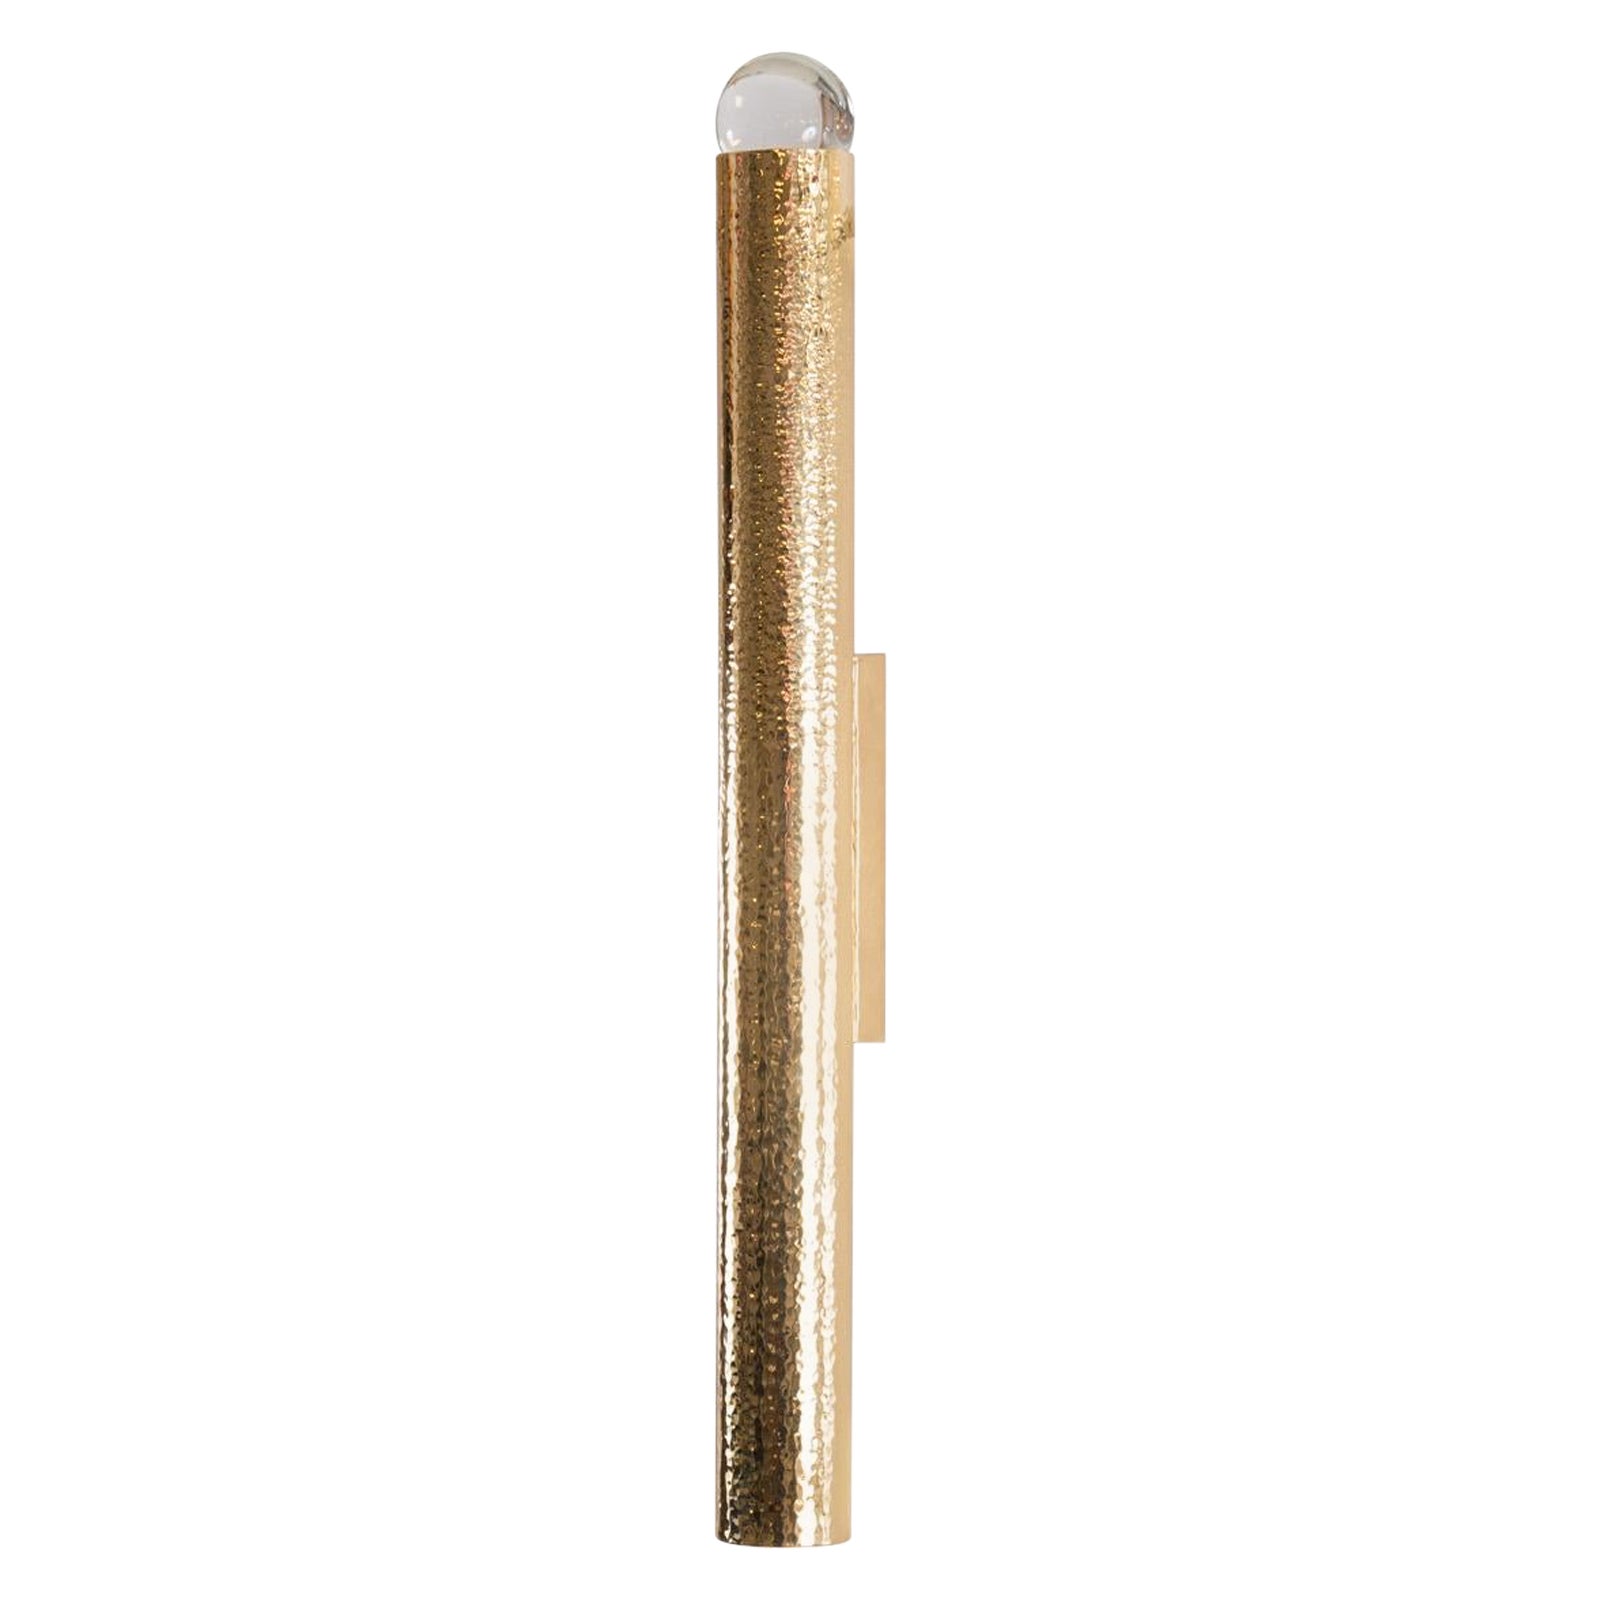 Elegant Hammered Brass, Tube Wall Light with a Crystal-Ball